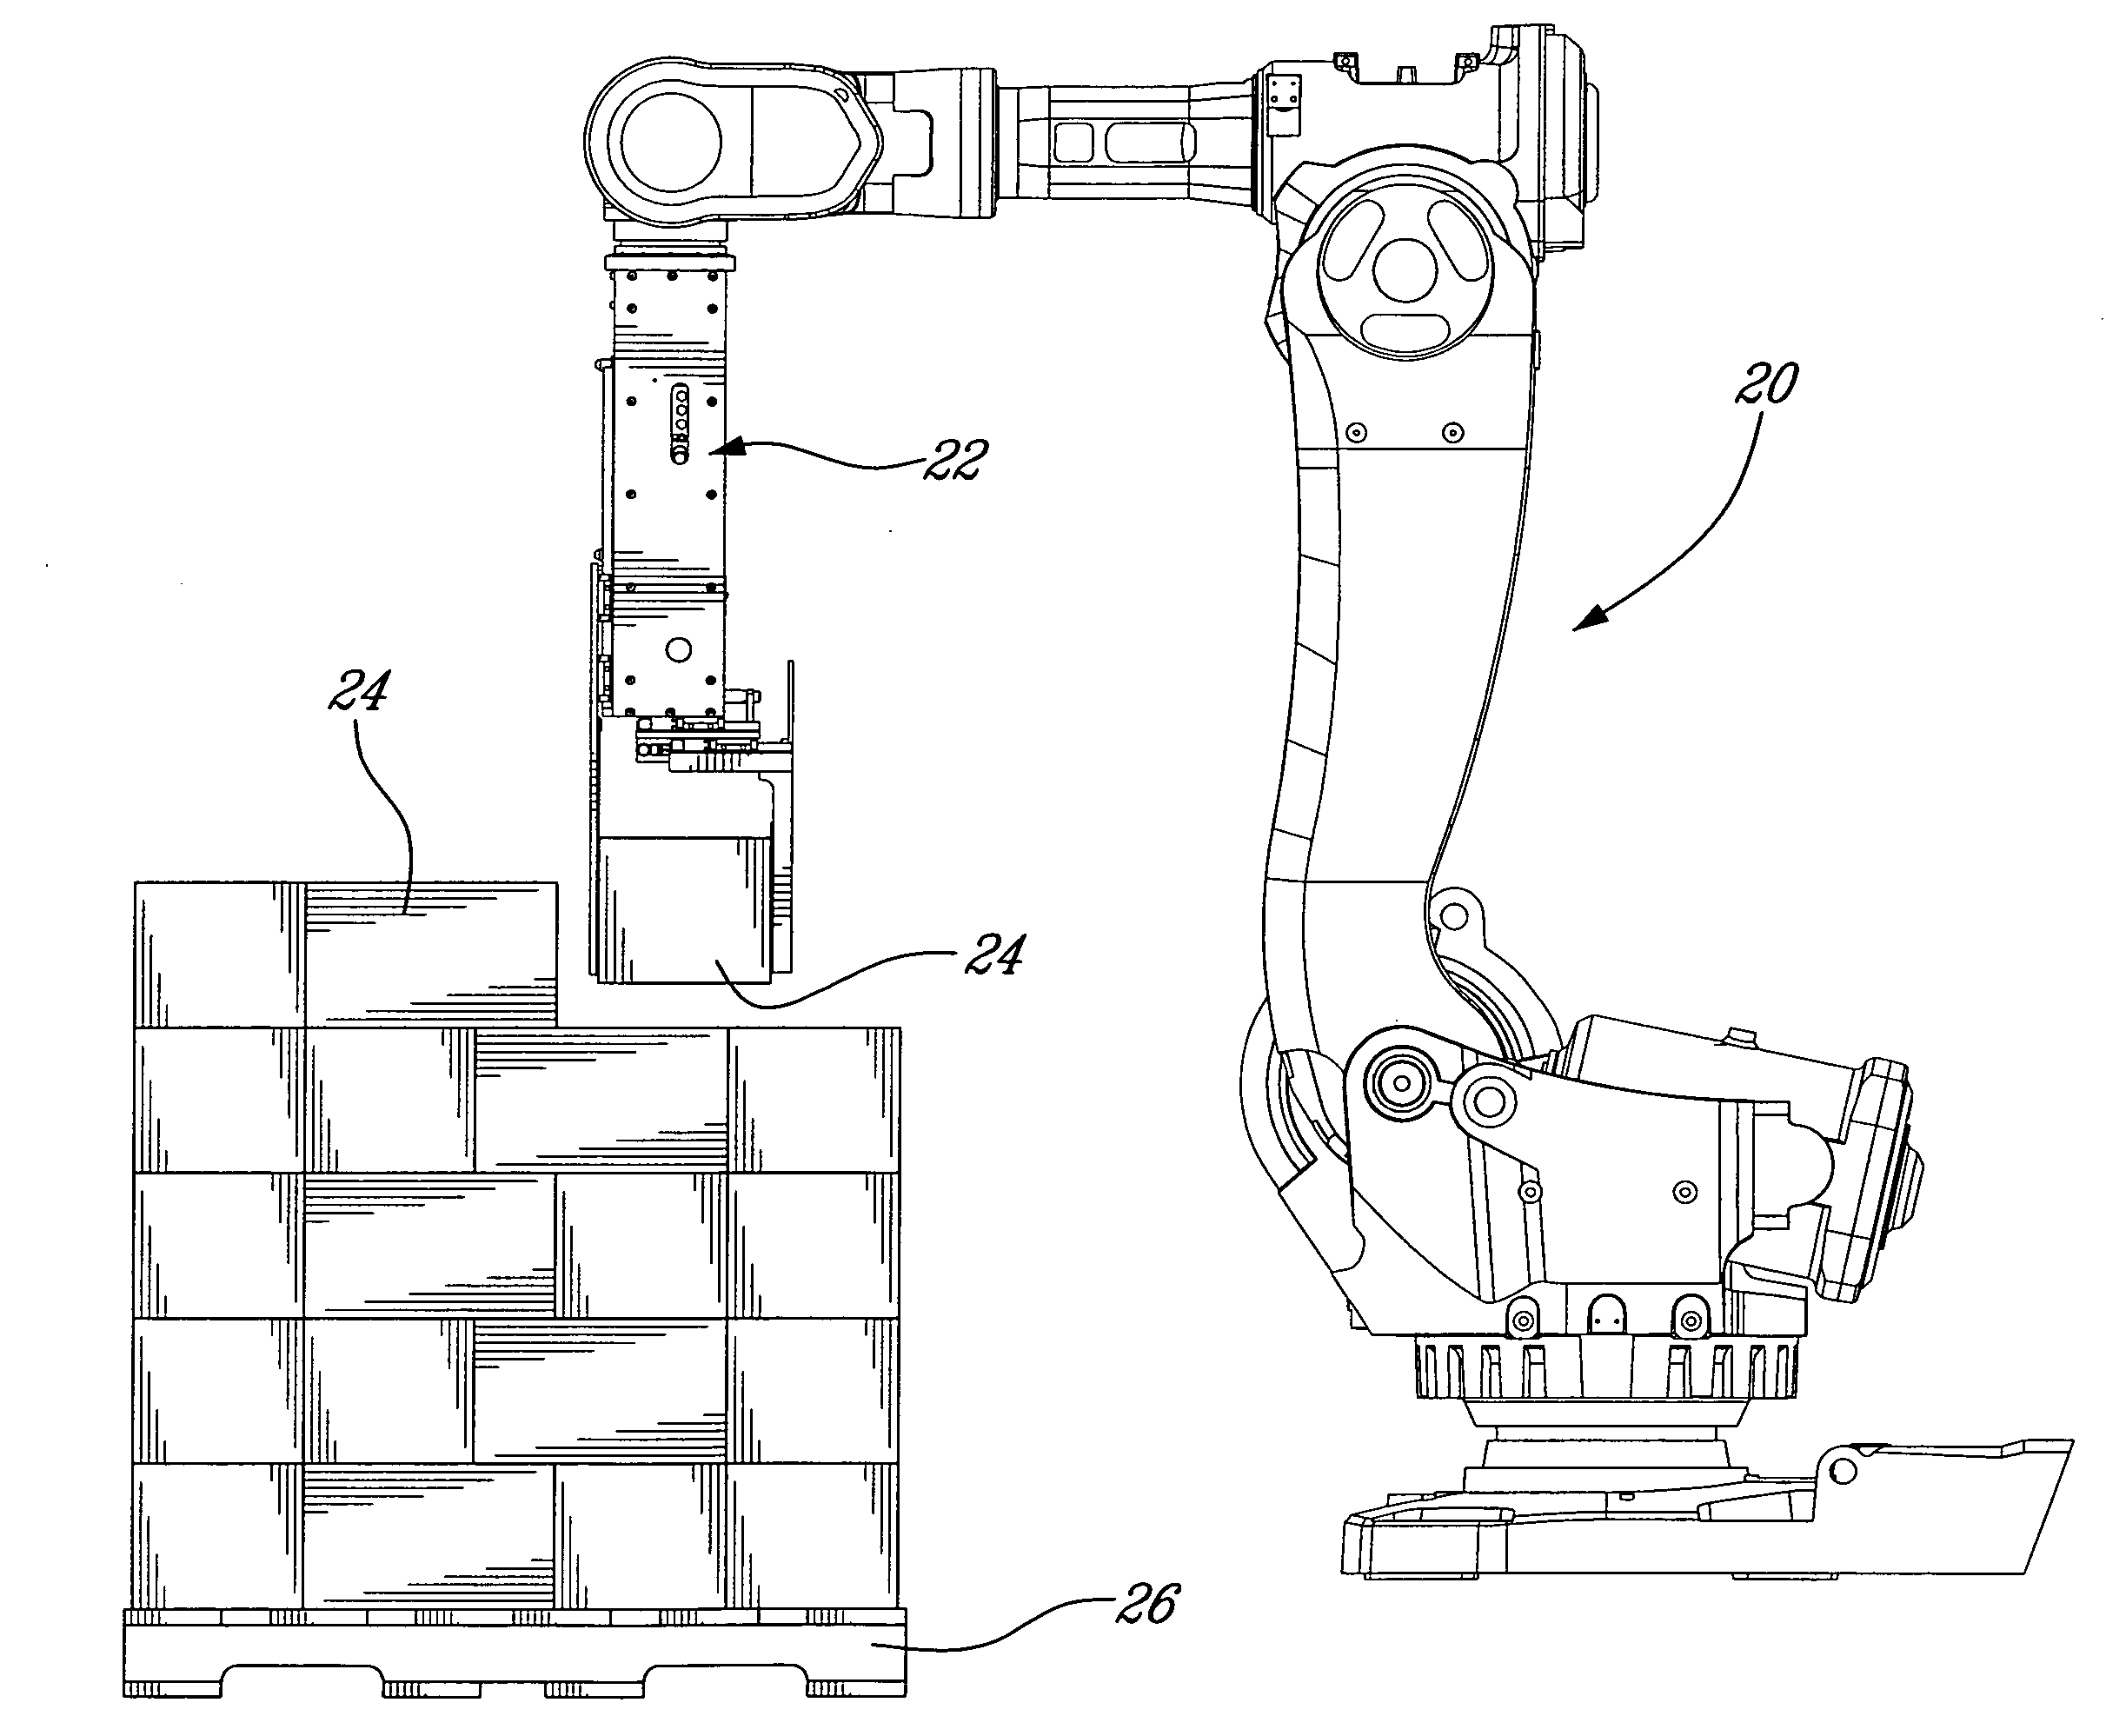 Tool and method for mixed palletizing/depalletizing